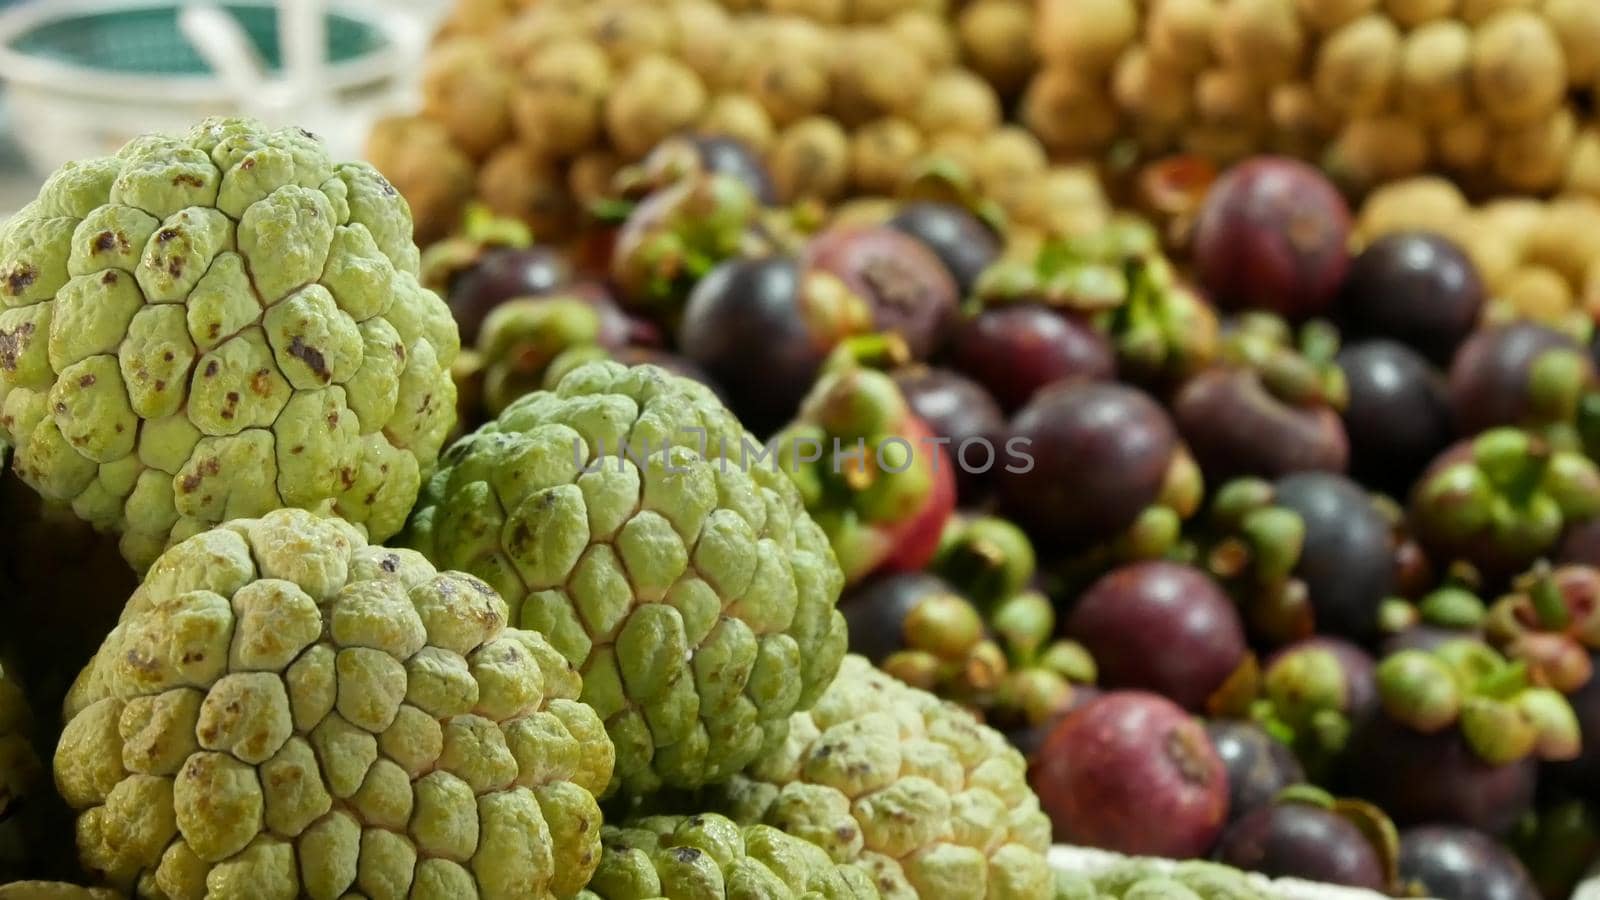 Assorted exotic fruits on stall in market. Bunch of sugar apples placed on blurred background of longans and mangosteens on stall on market in tropical country.